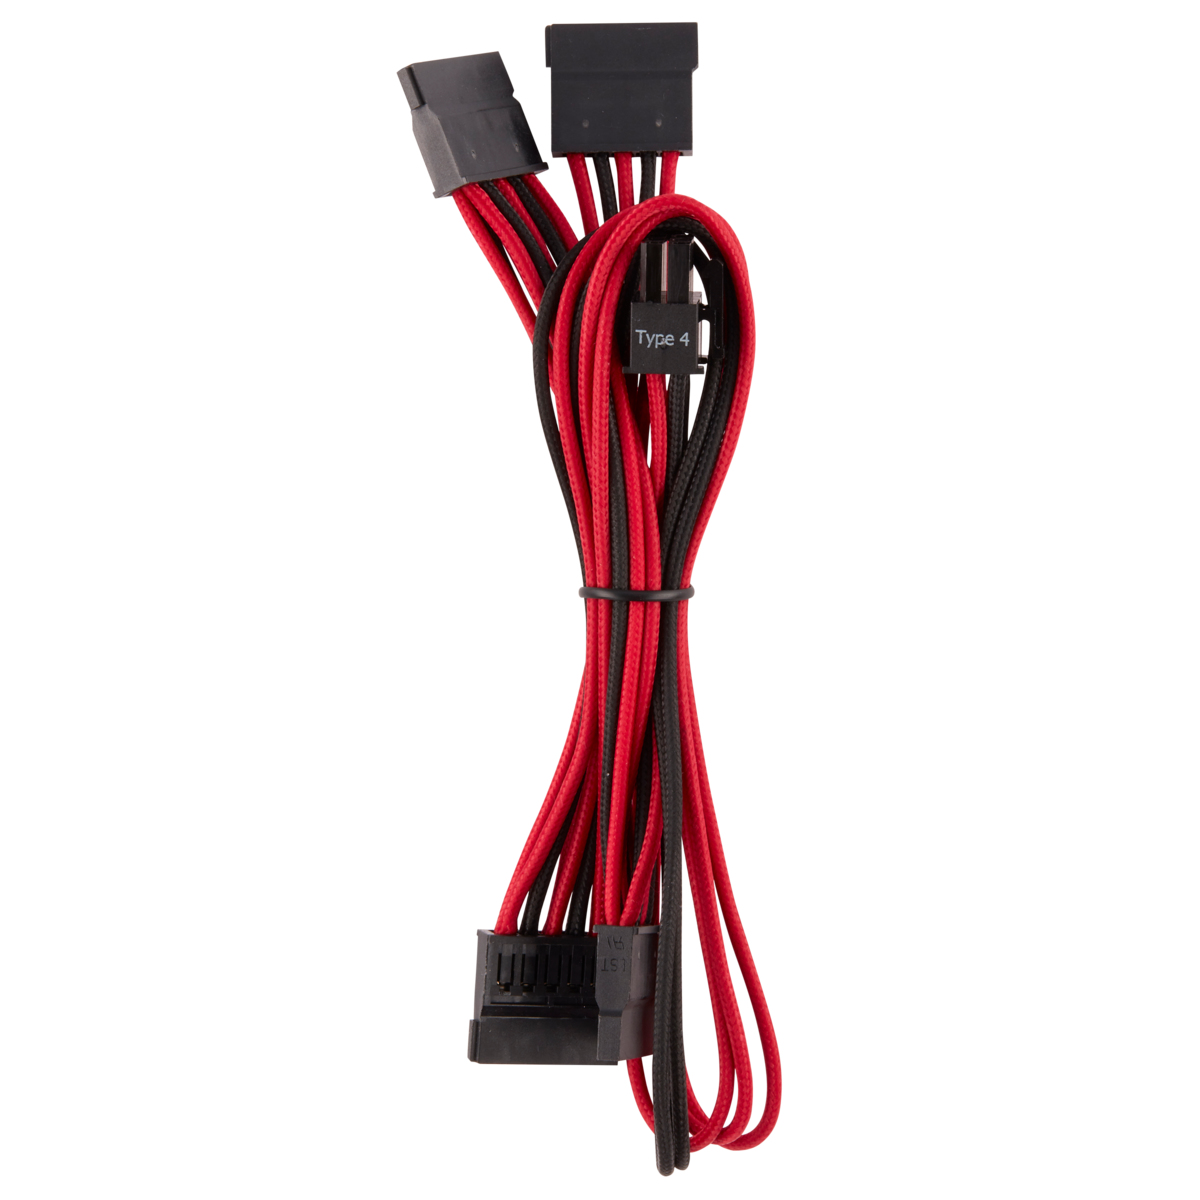 Individually Sleeved SATA Cable - Red